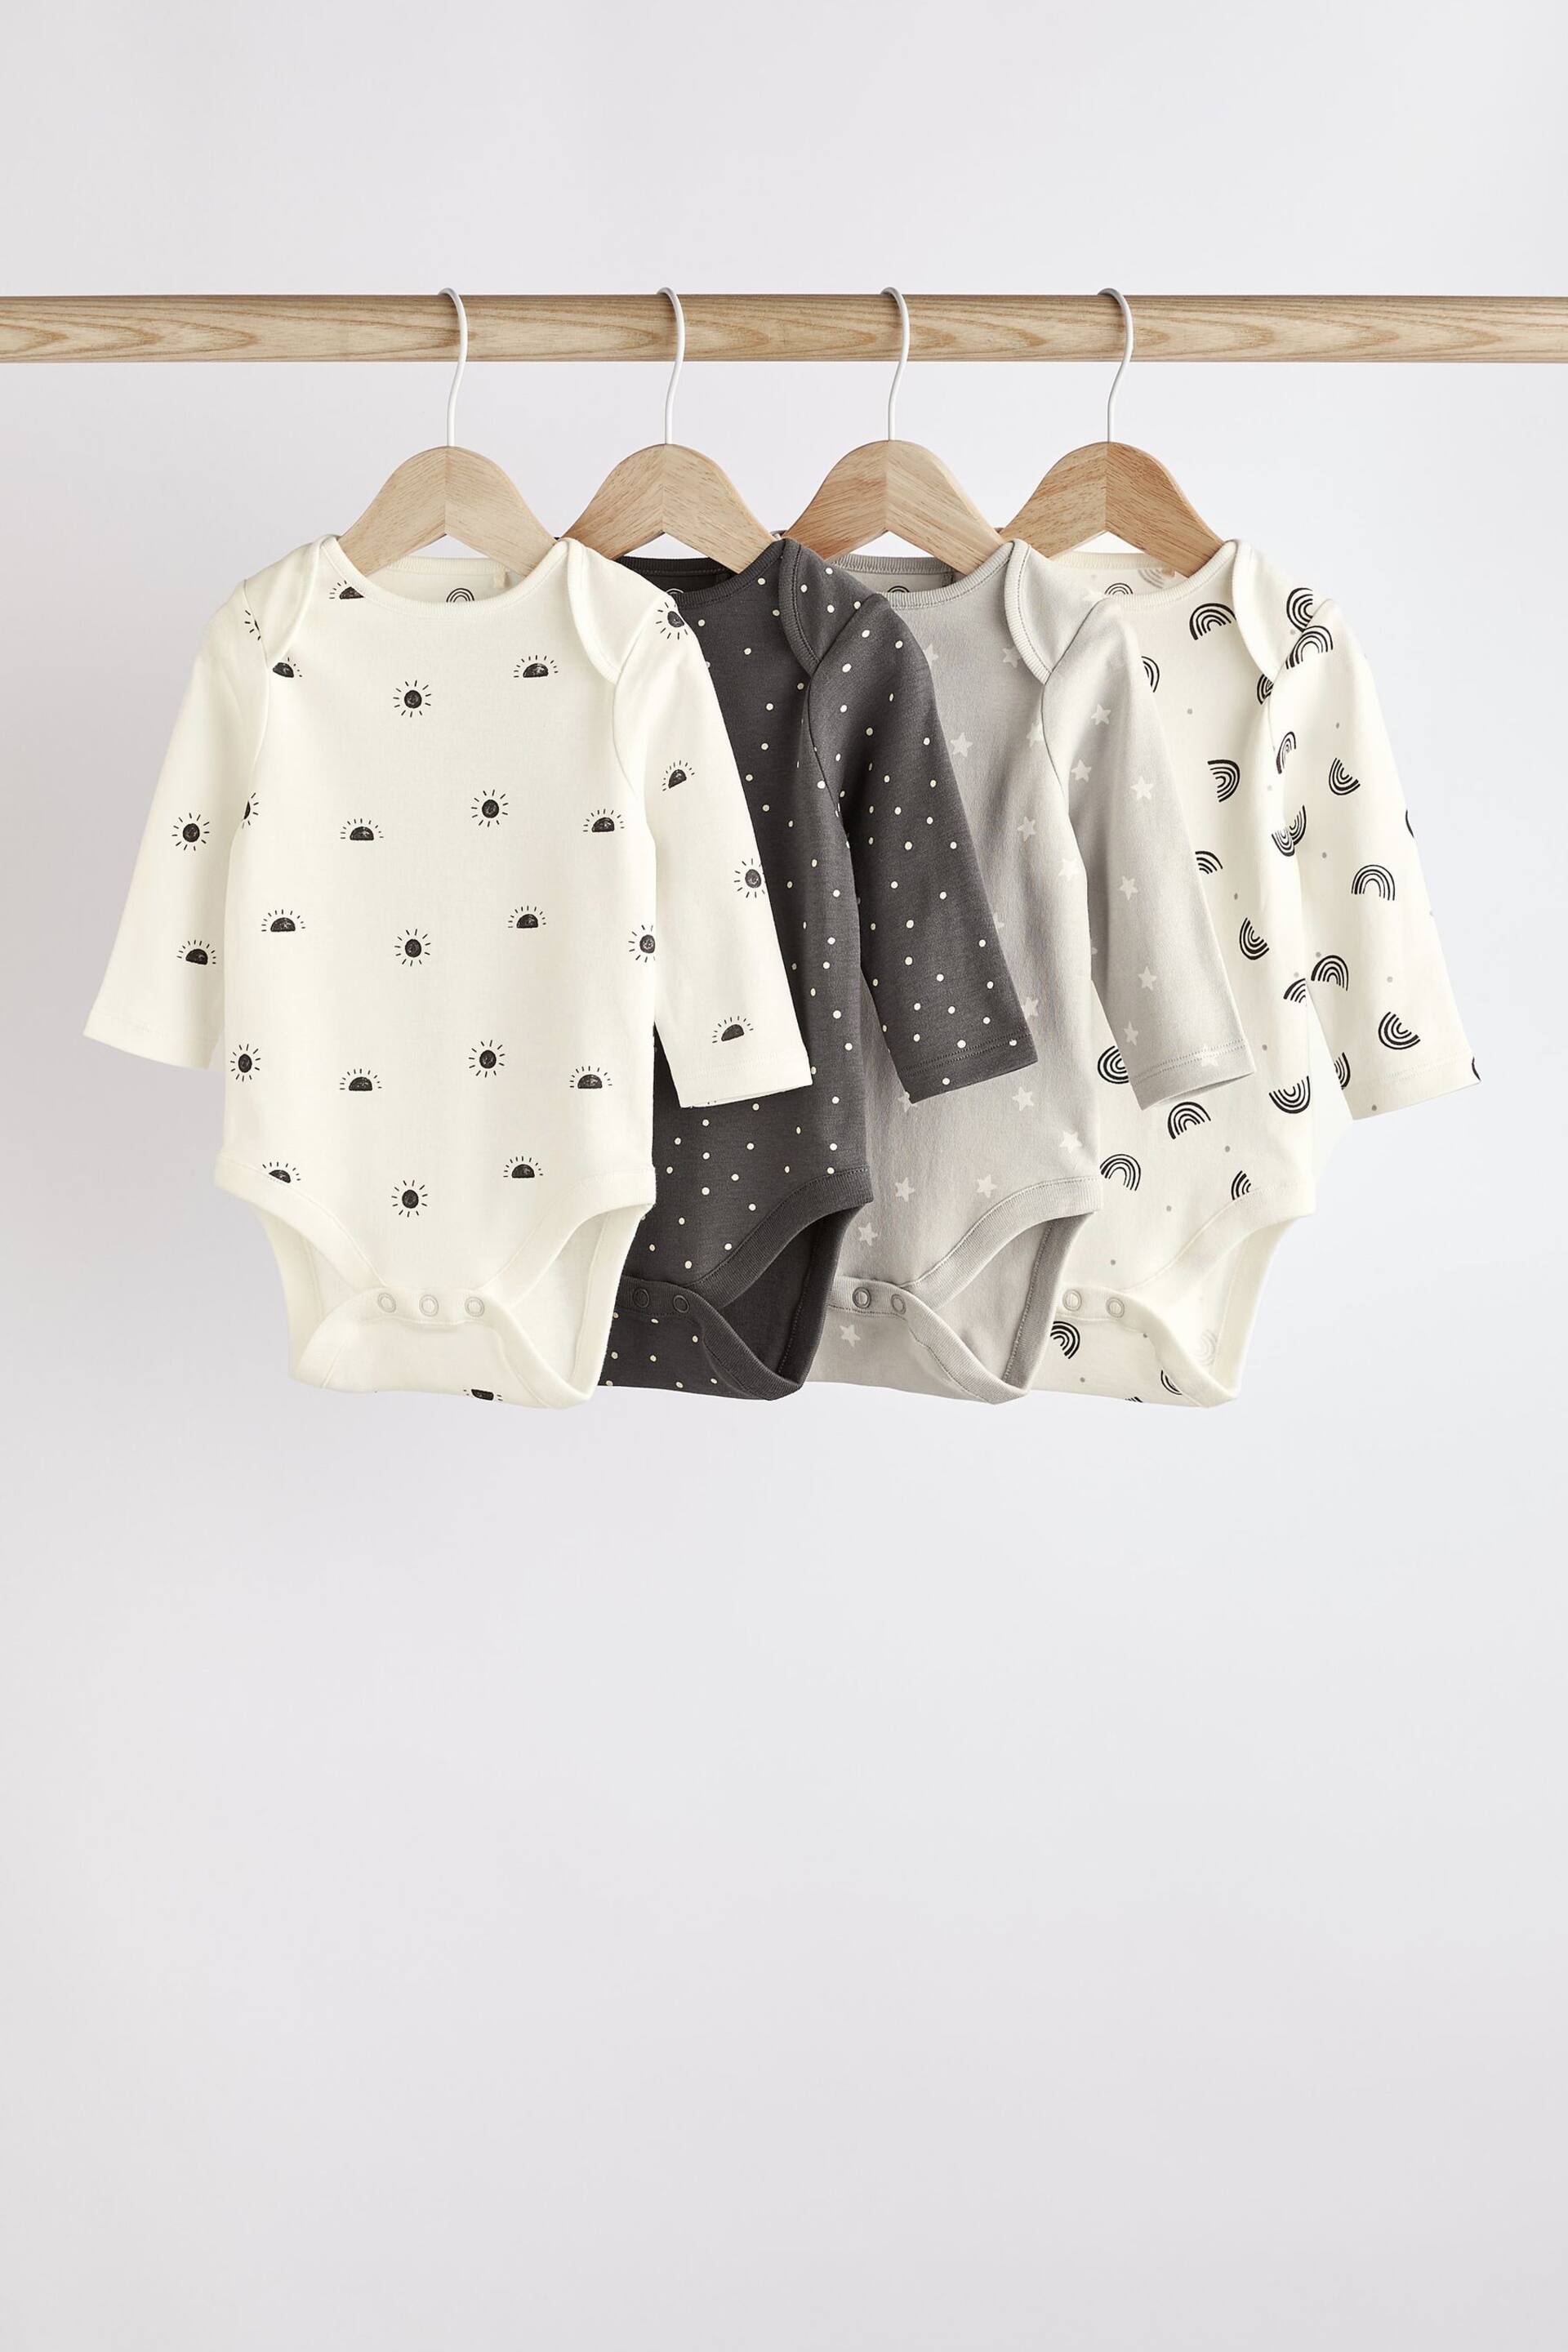 Monochrome 4 Pack Baby Printed Long Sleeve Bodysuits - Image 1 of 7